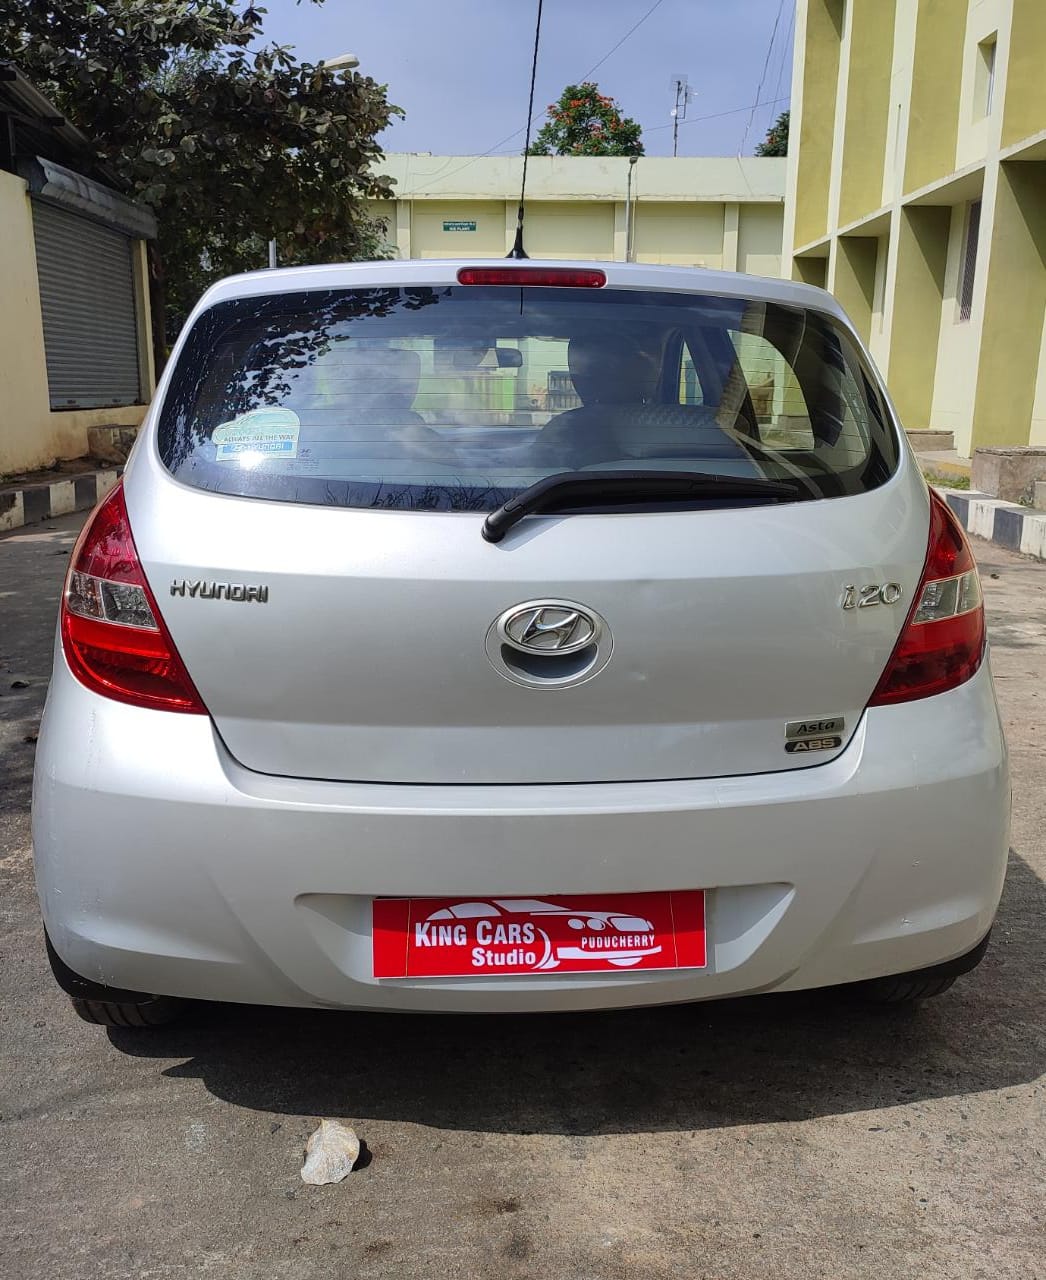 5874-for-sale-Hyundai-i20-Petrol-First-Owner-2010-PY-registered-rs-284999